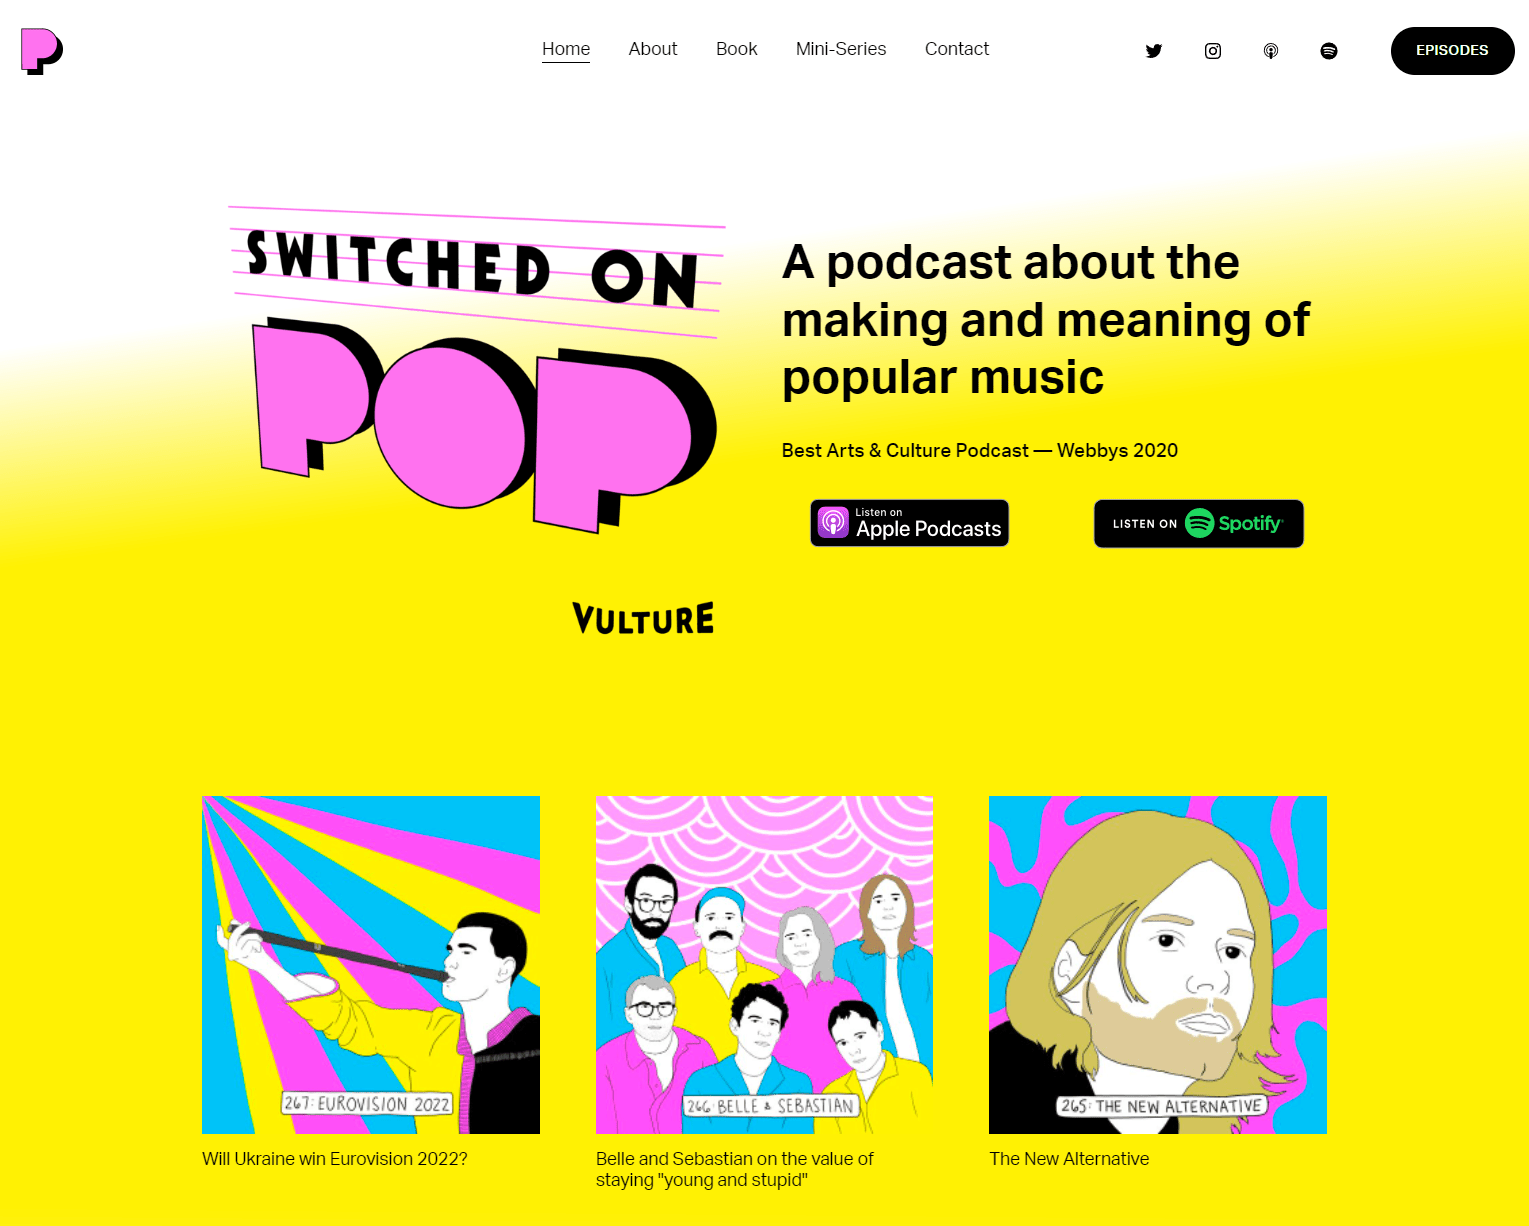 Switched on pop podcast